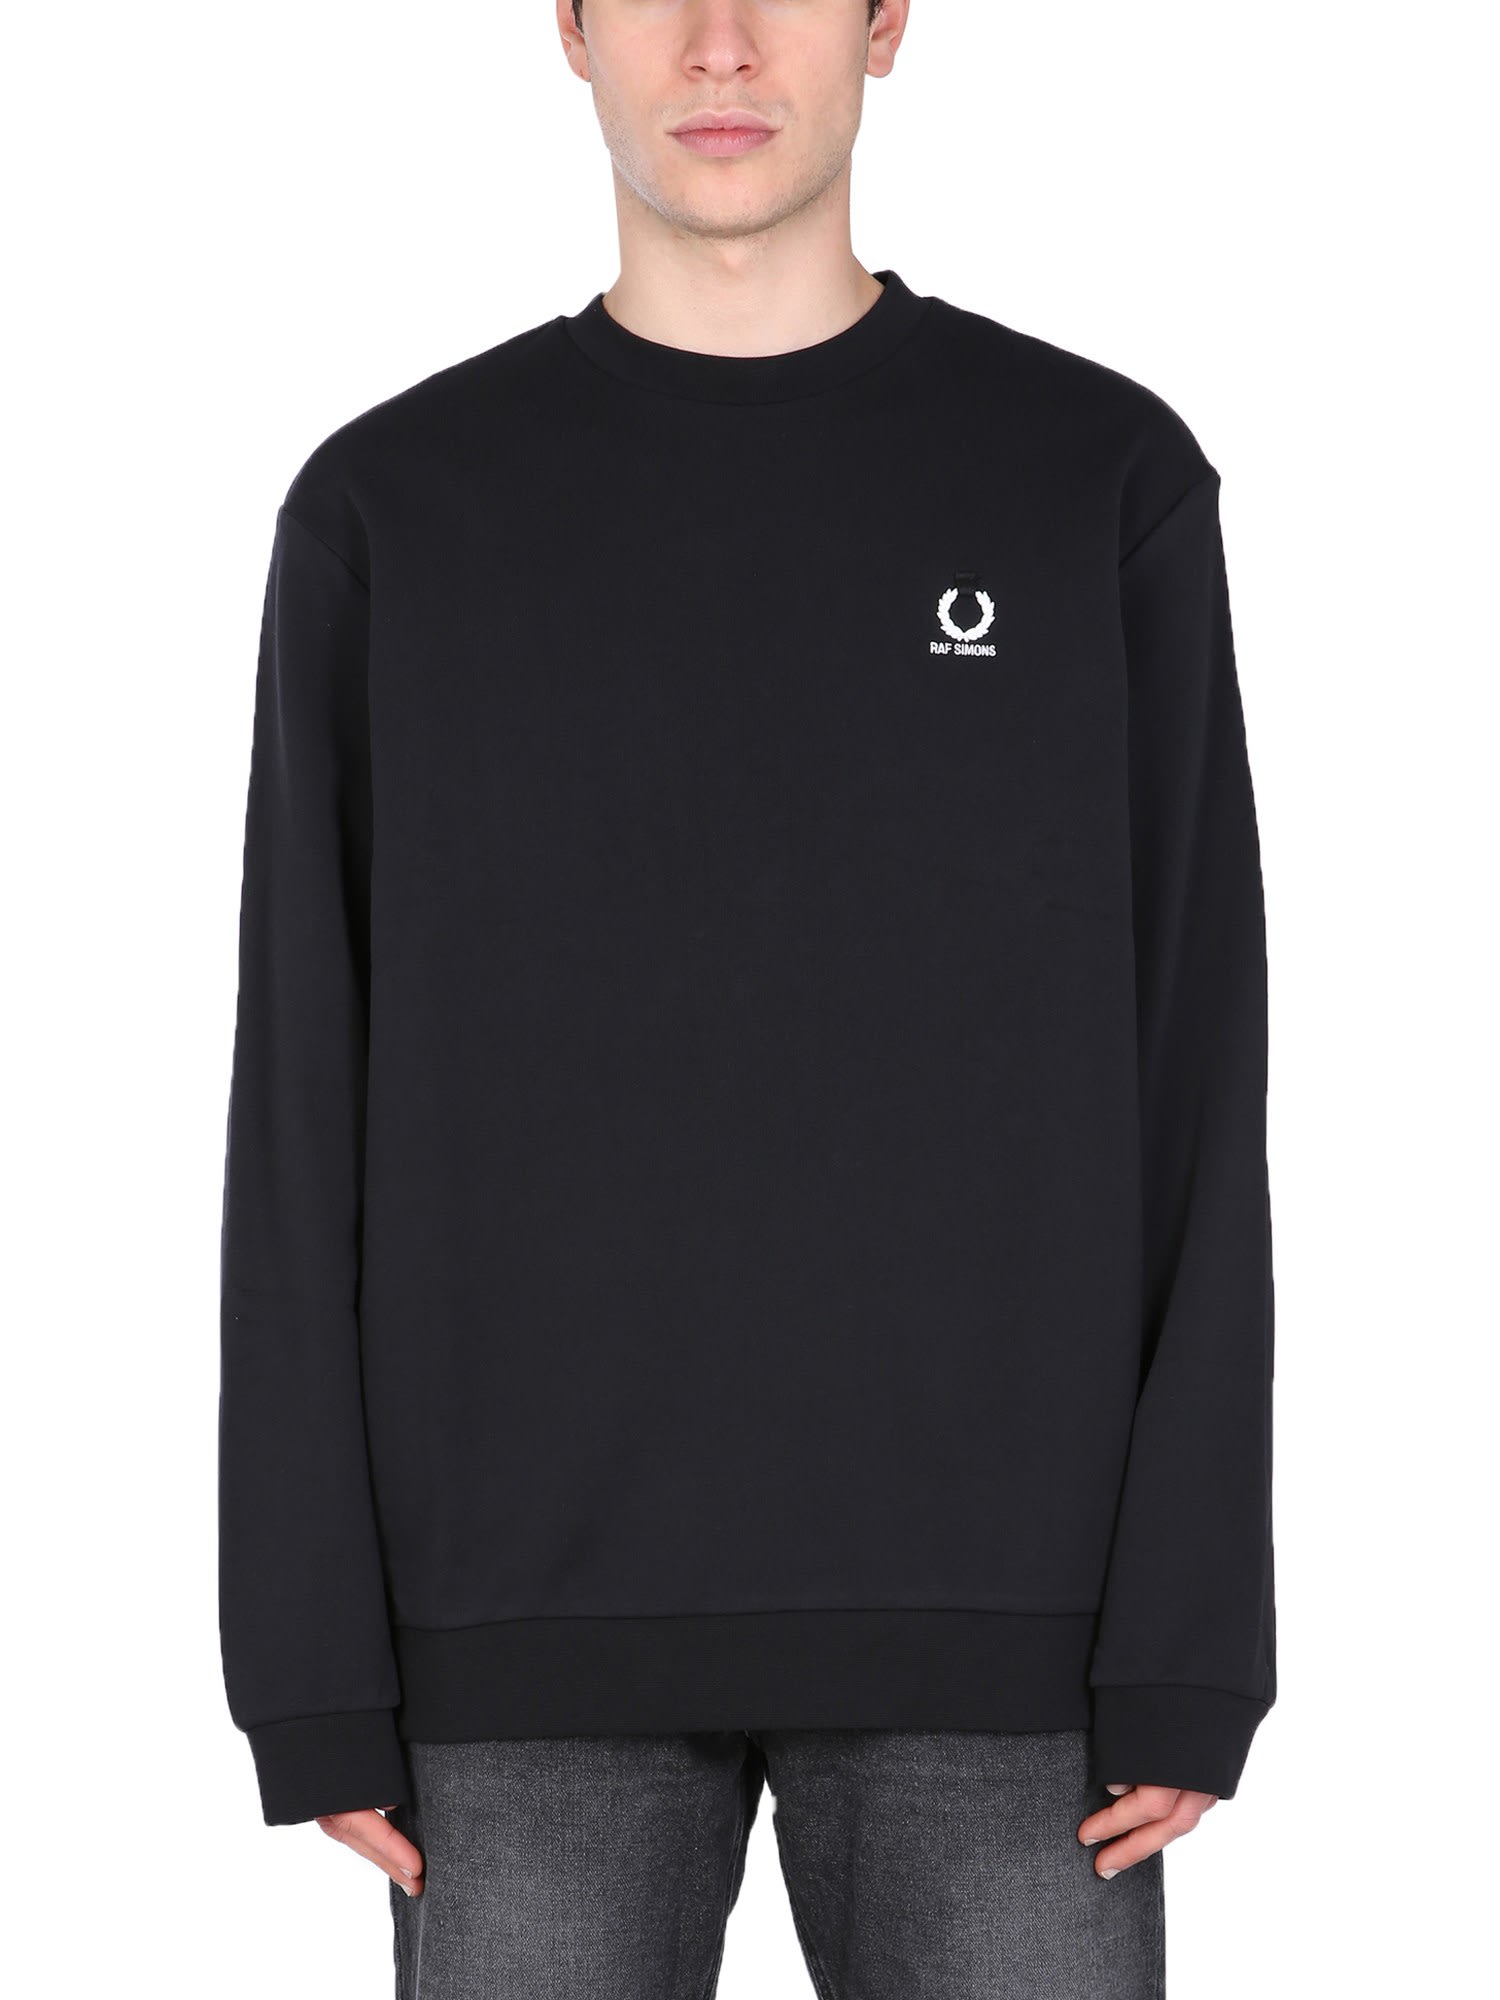 Fred Perry by Raf Simons Crew Neck Sweatshirt